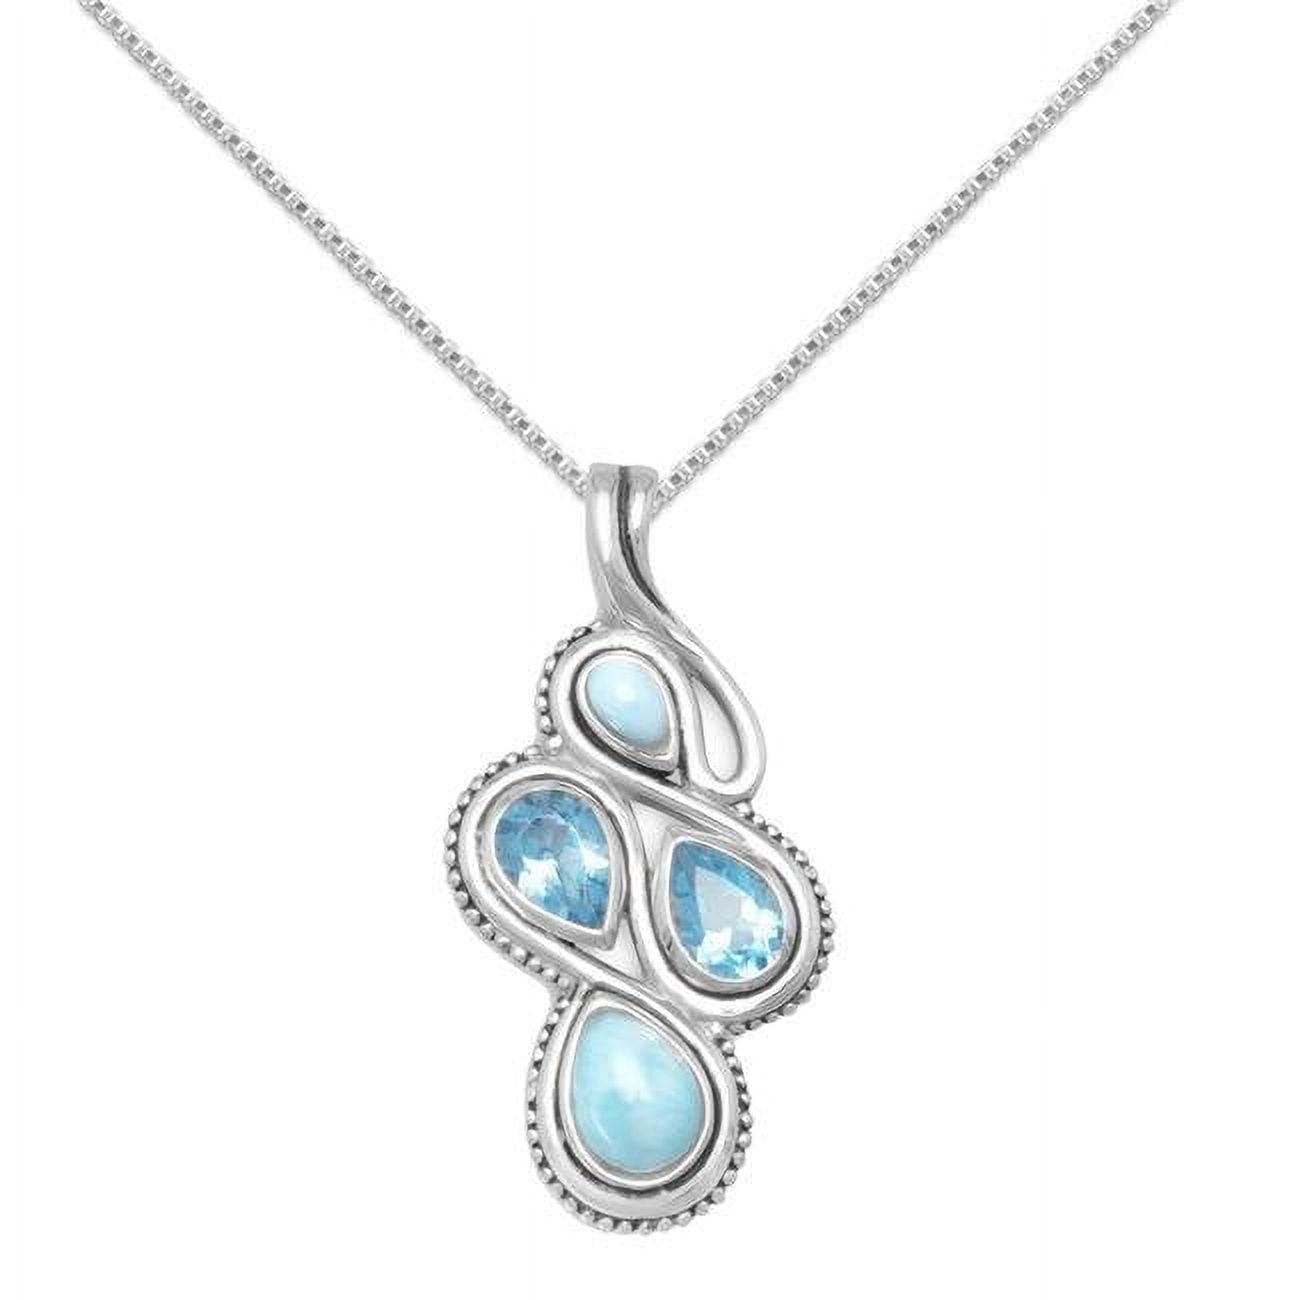 74279-24 24 In. Oxidized Sterling Silver Blue Topaz & Larimar Figure 8 Slide Pendant With 1.5 Mm Box Chain